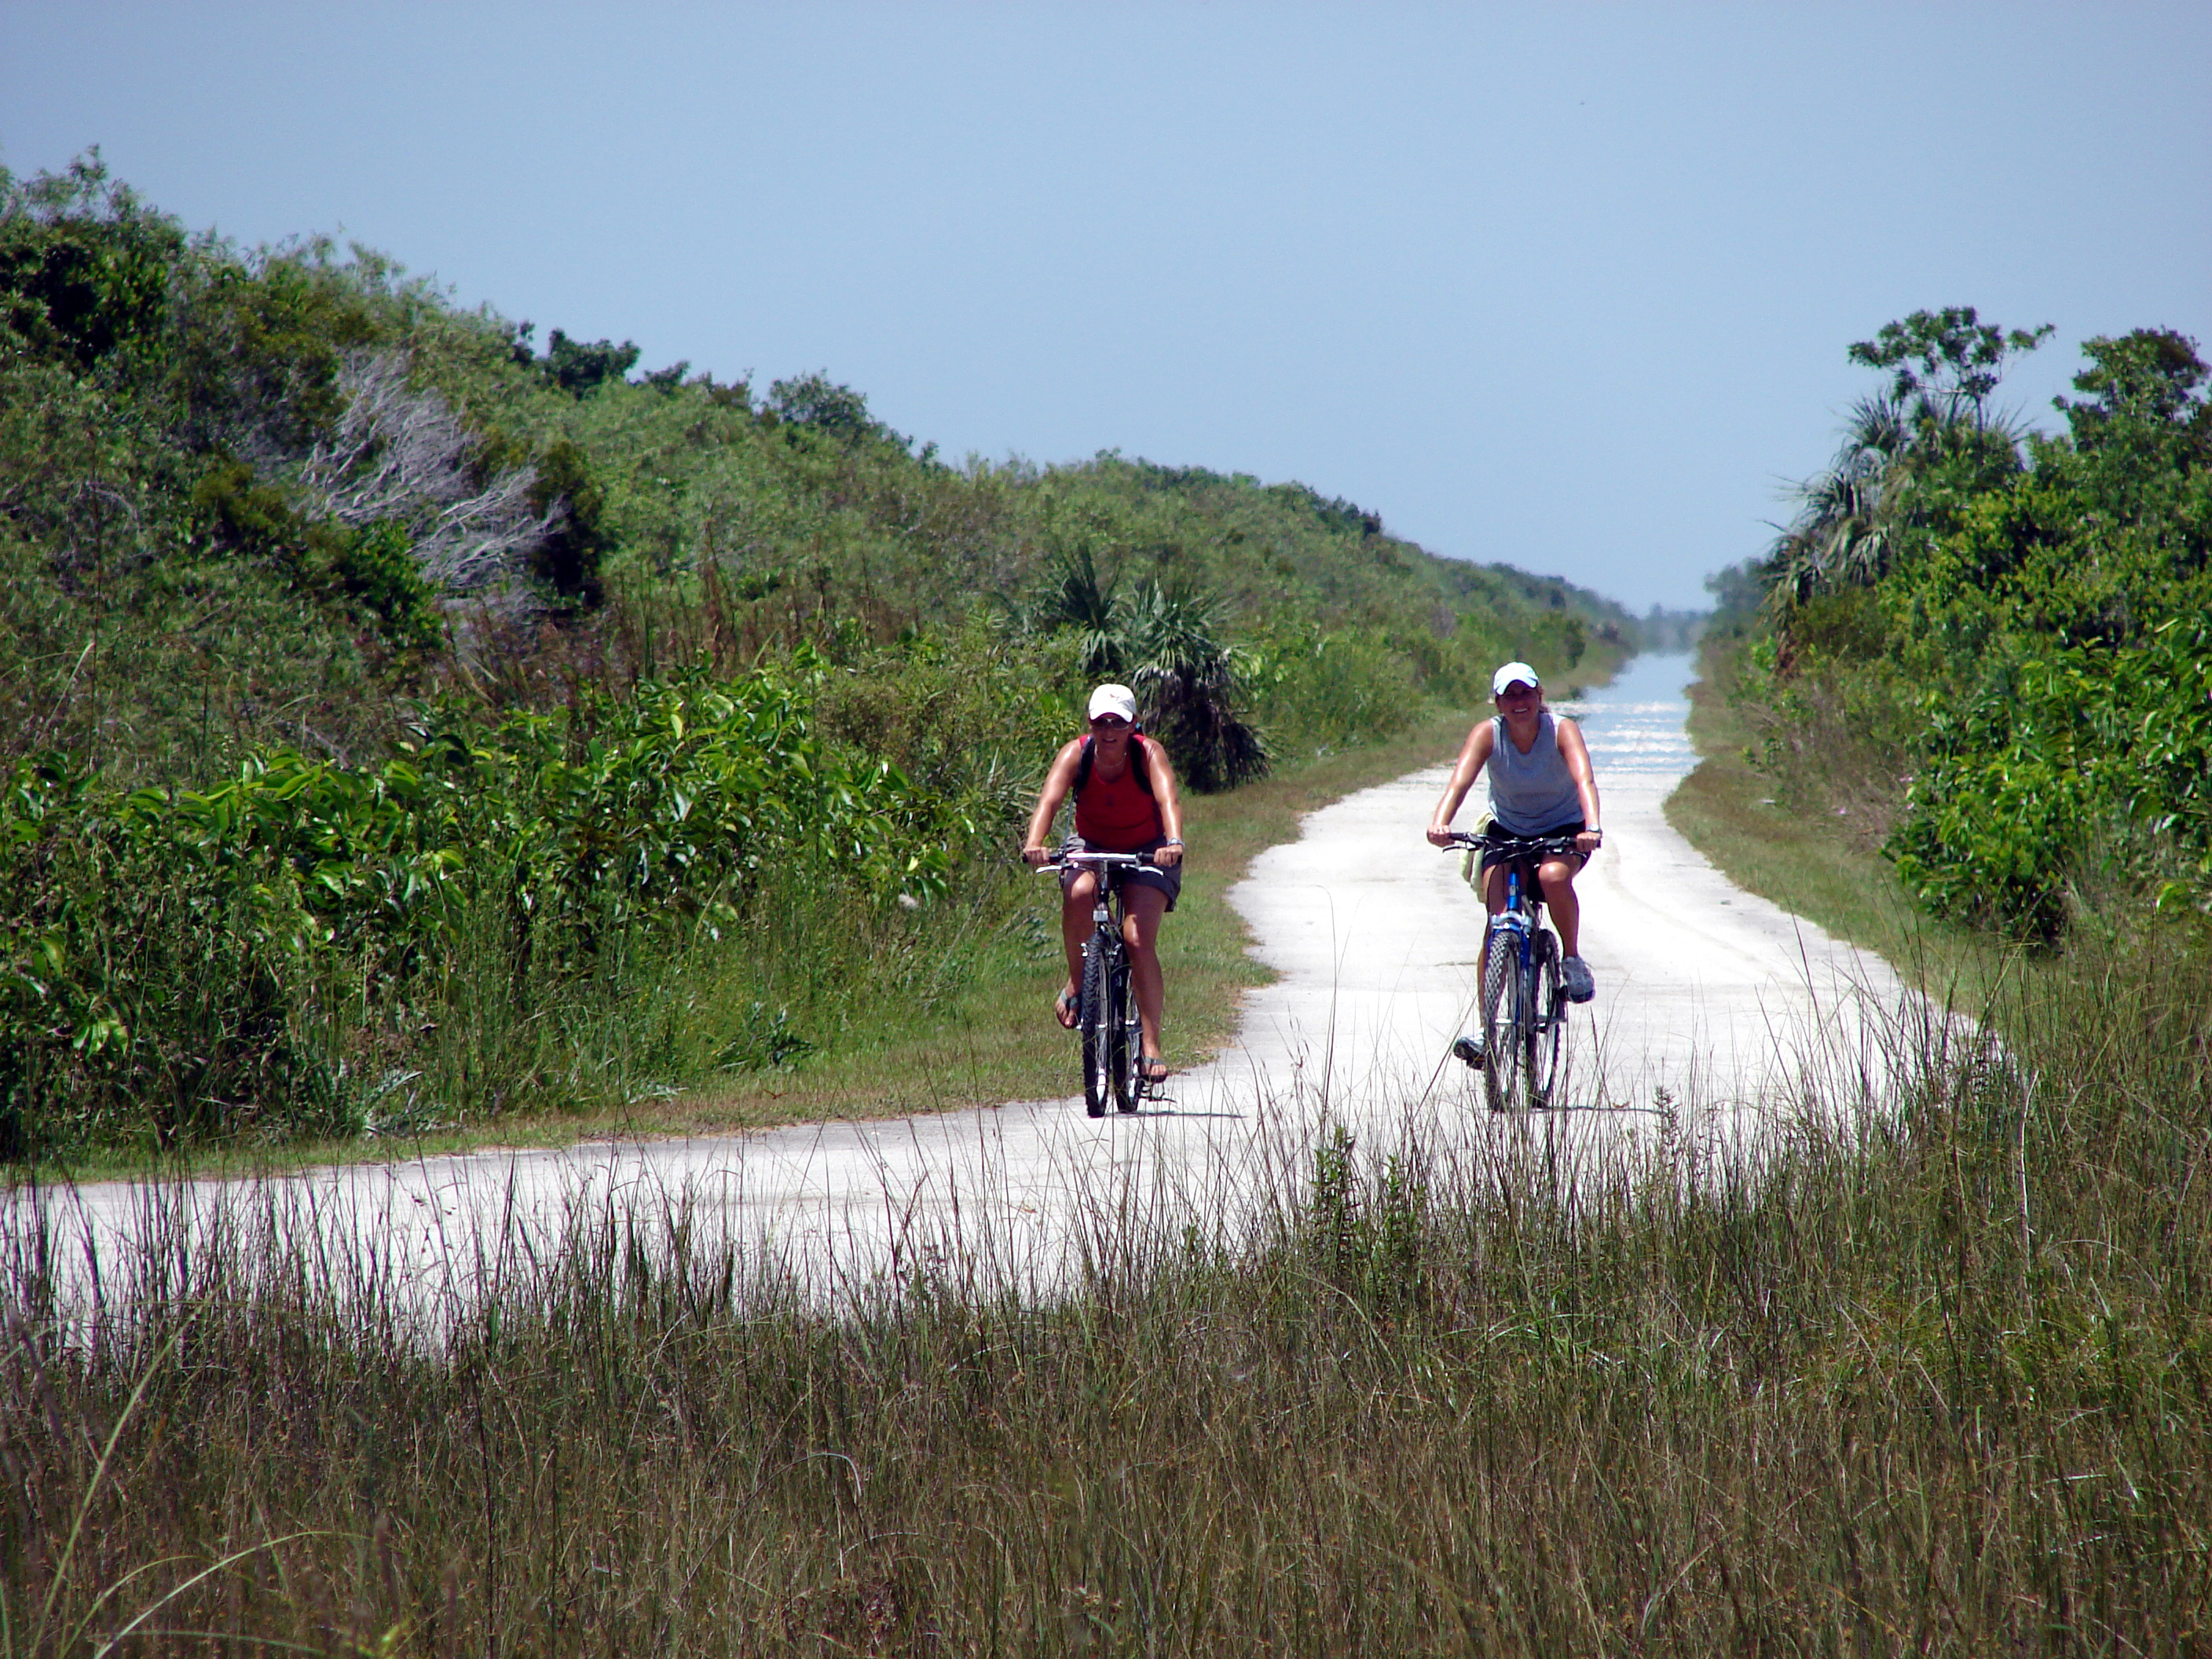 Two visitors bike along the road in Shark Valley.